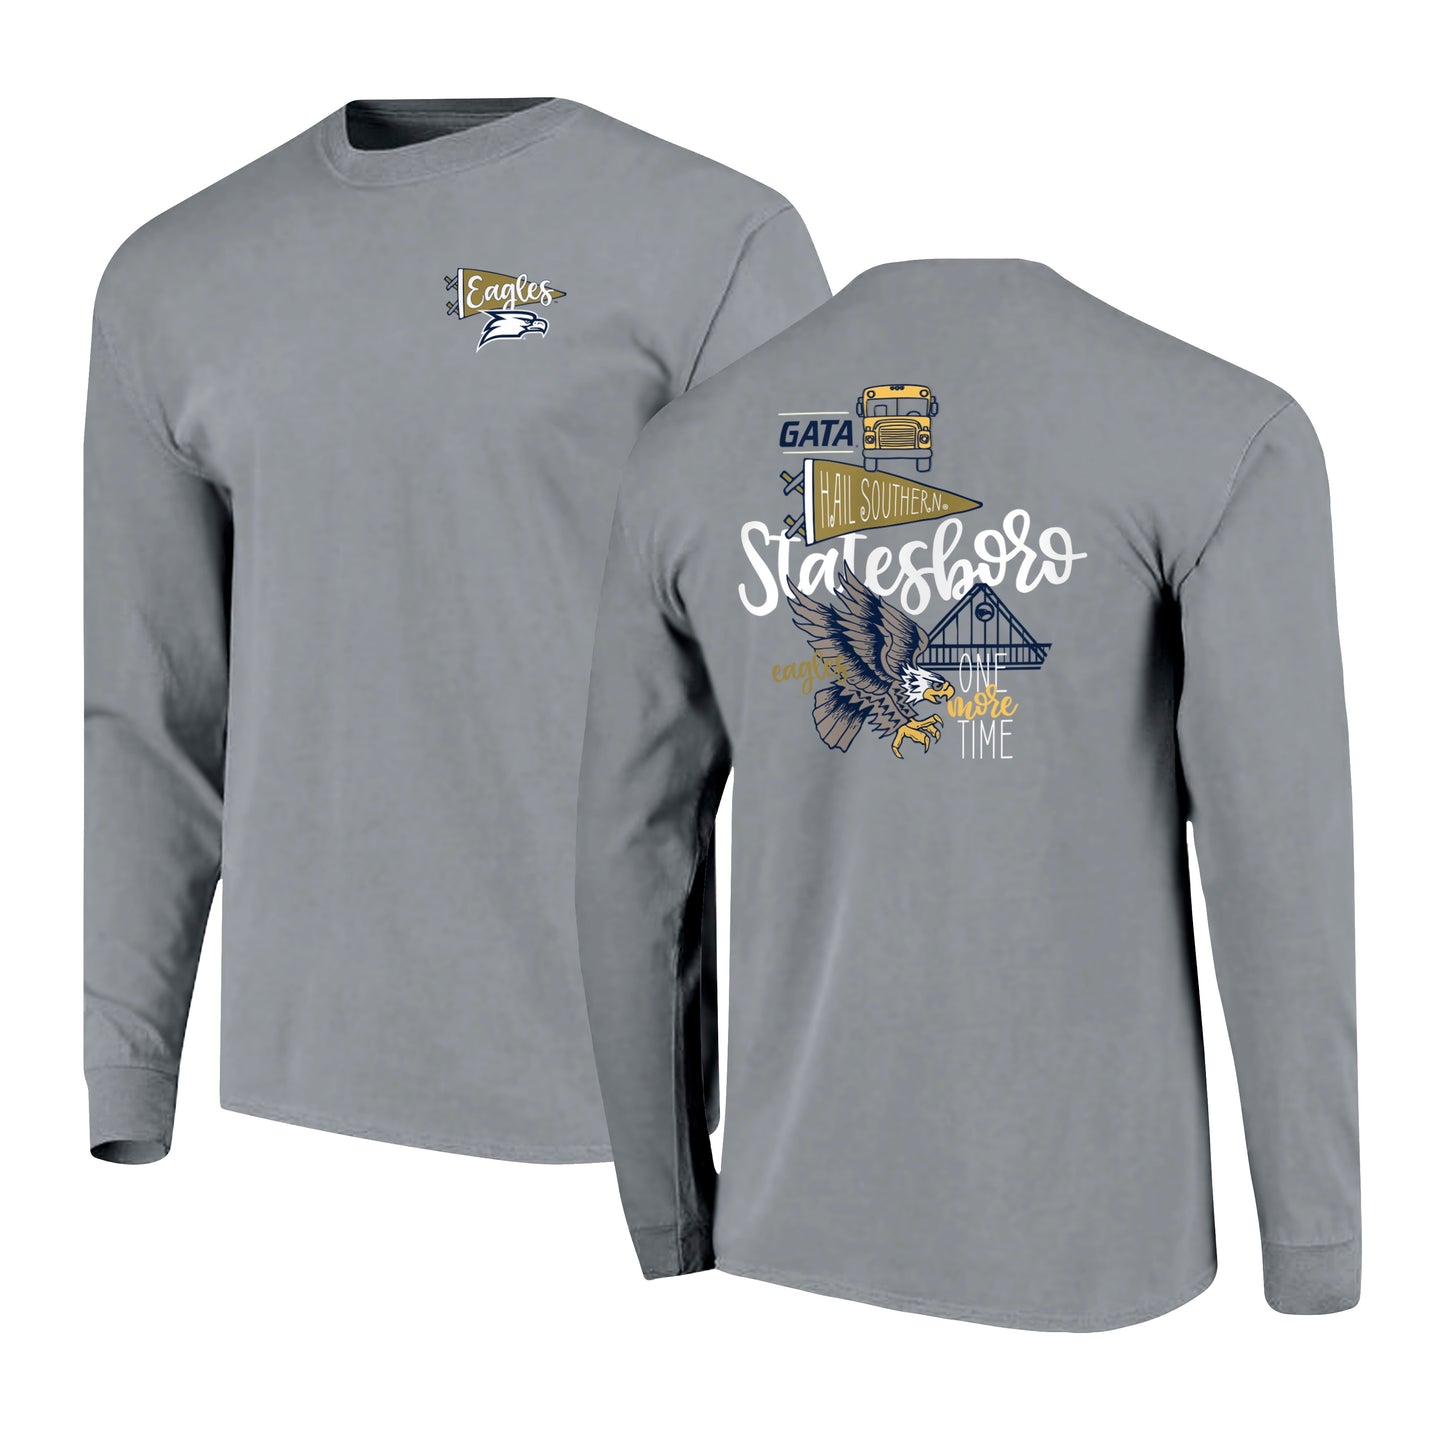 Campus State Statesboro - LONG SLEEVE Comfort Colors